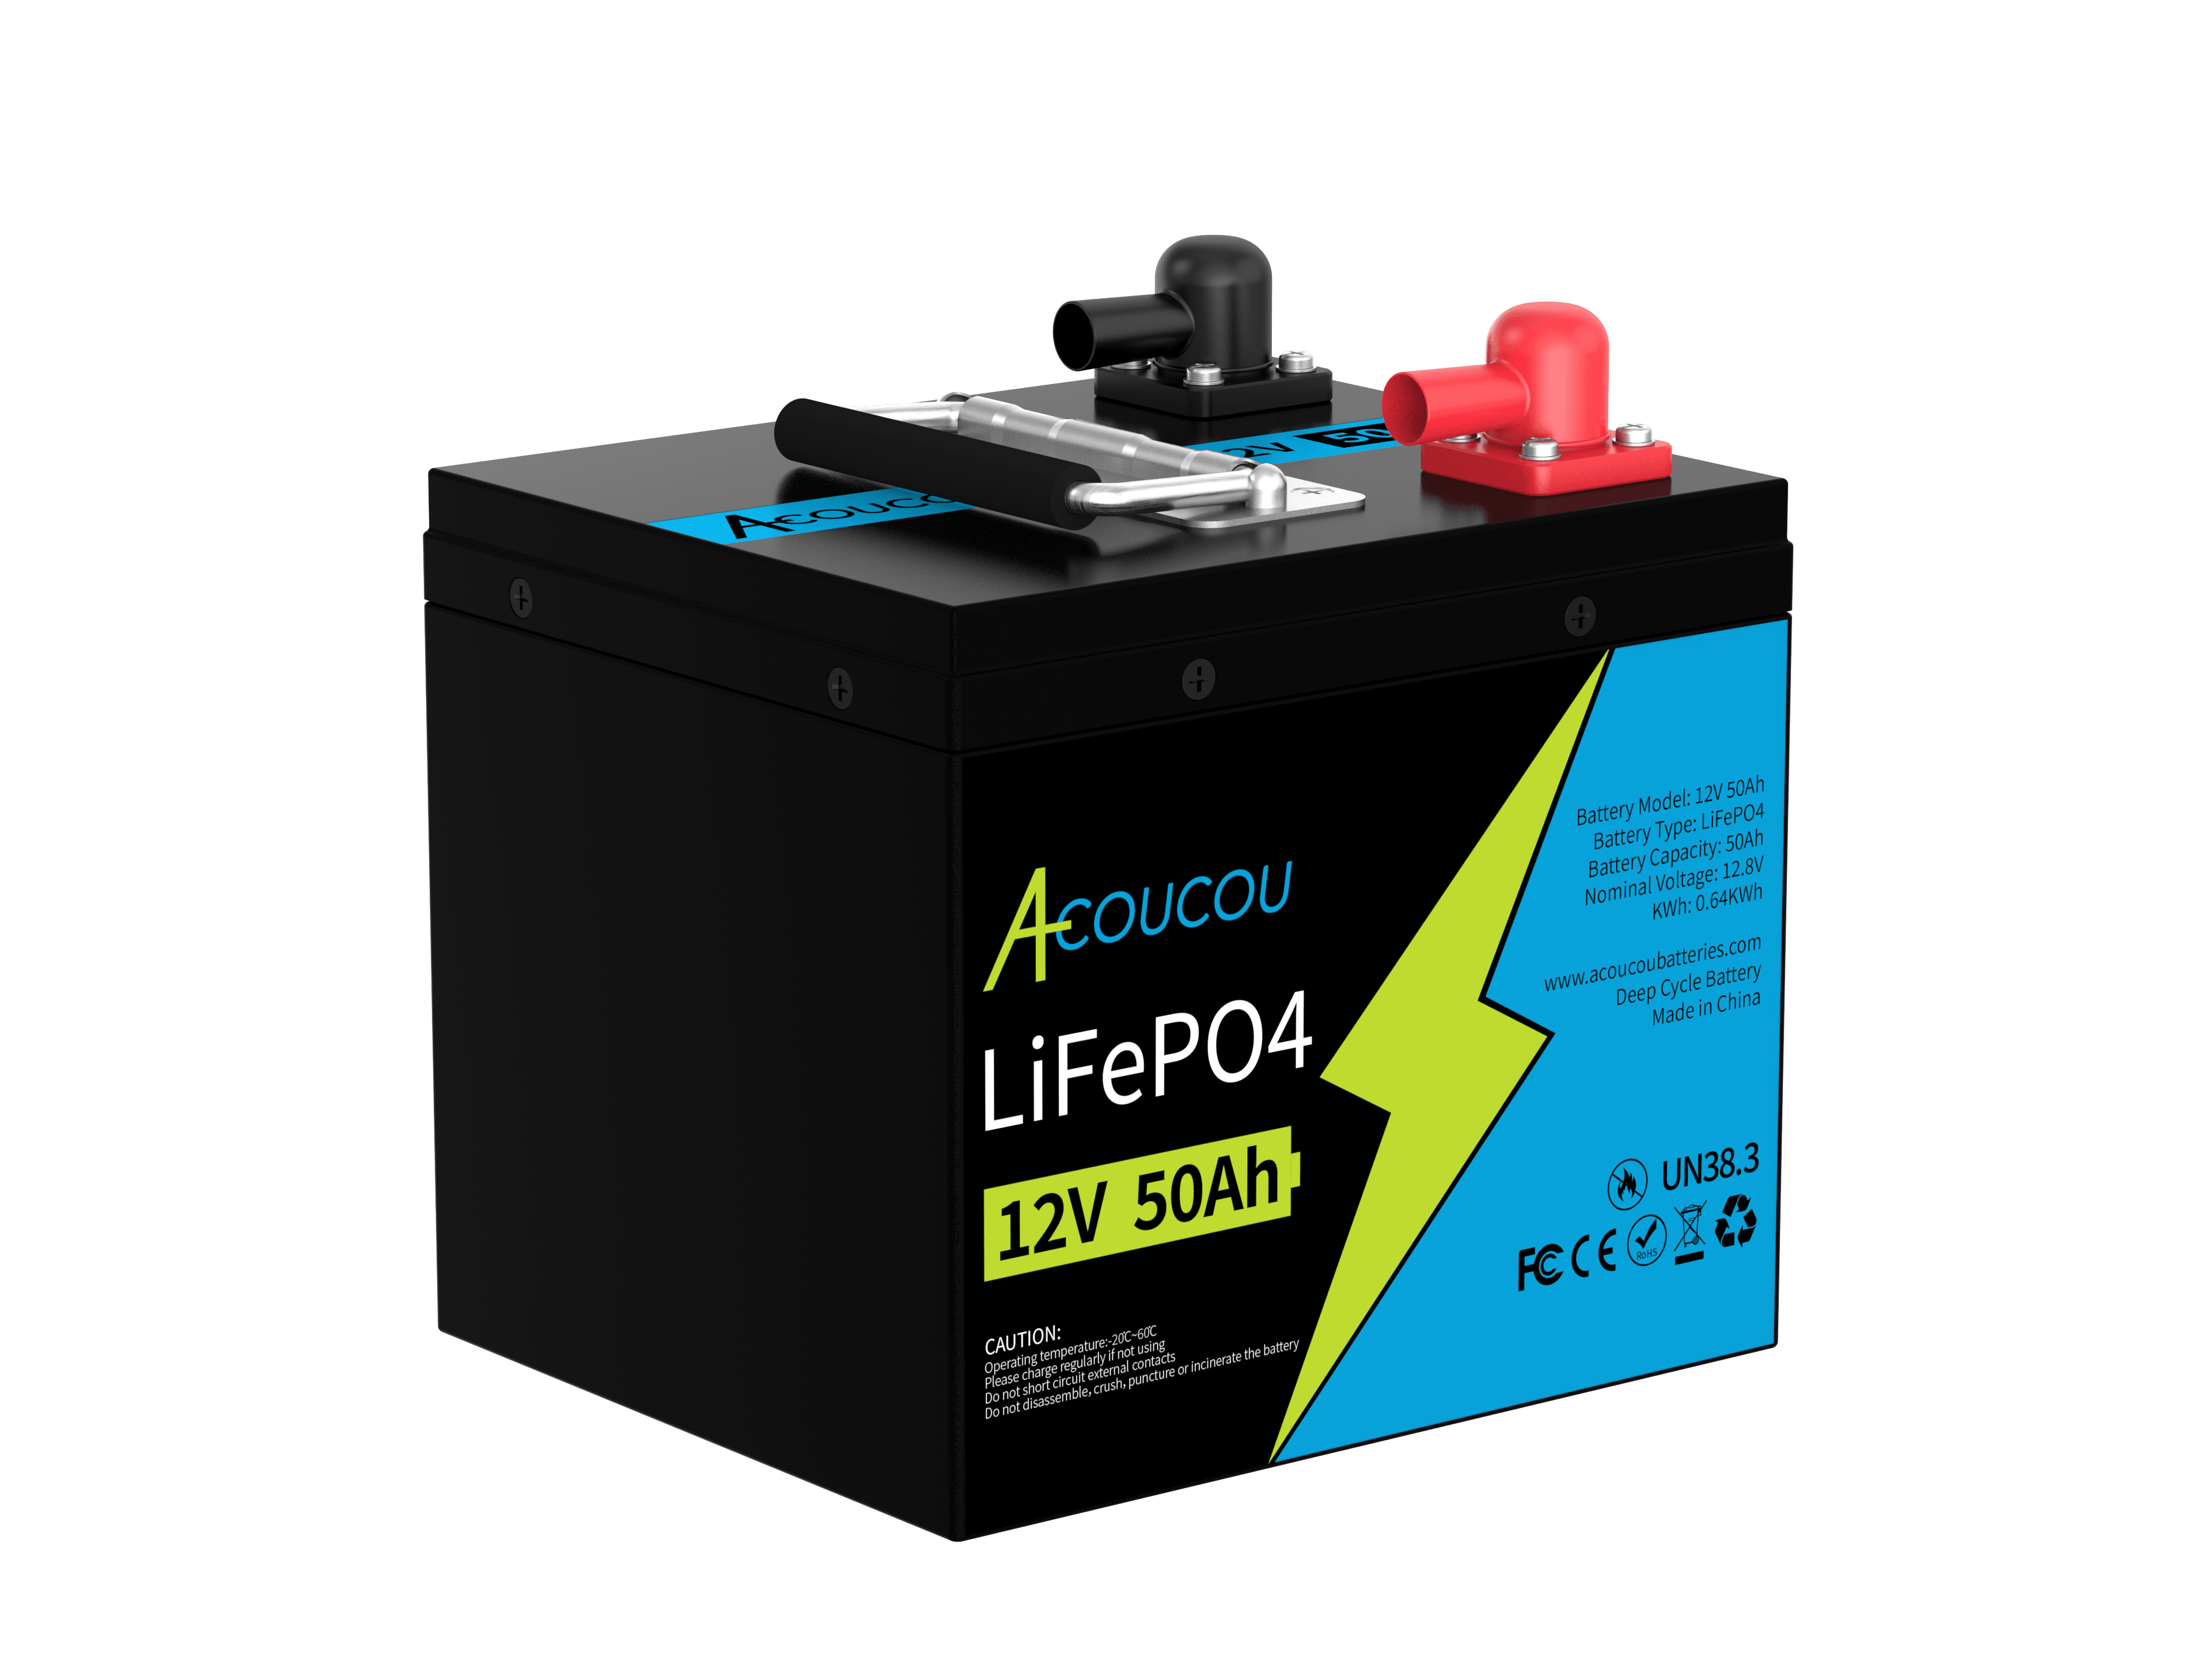 Acoucou MaxOne 12V 50Ah Bluetooth Lithium LiFePO4 Deep Cycle Battery,RV Marine Motor Golfcart Battery - Acoucoubatteries